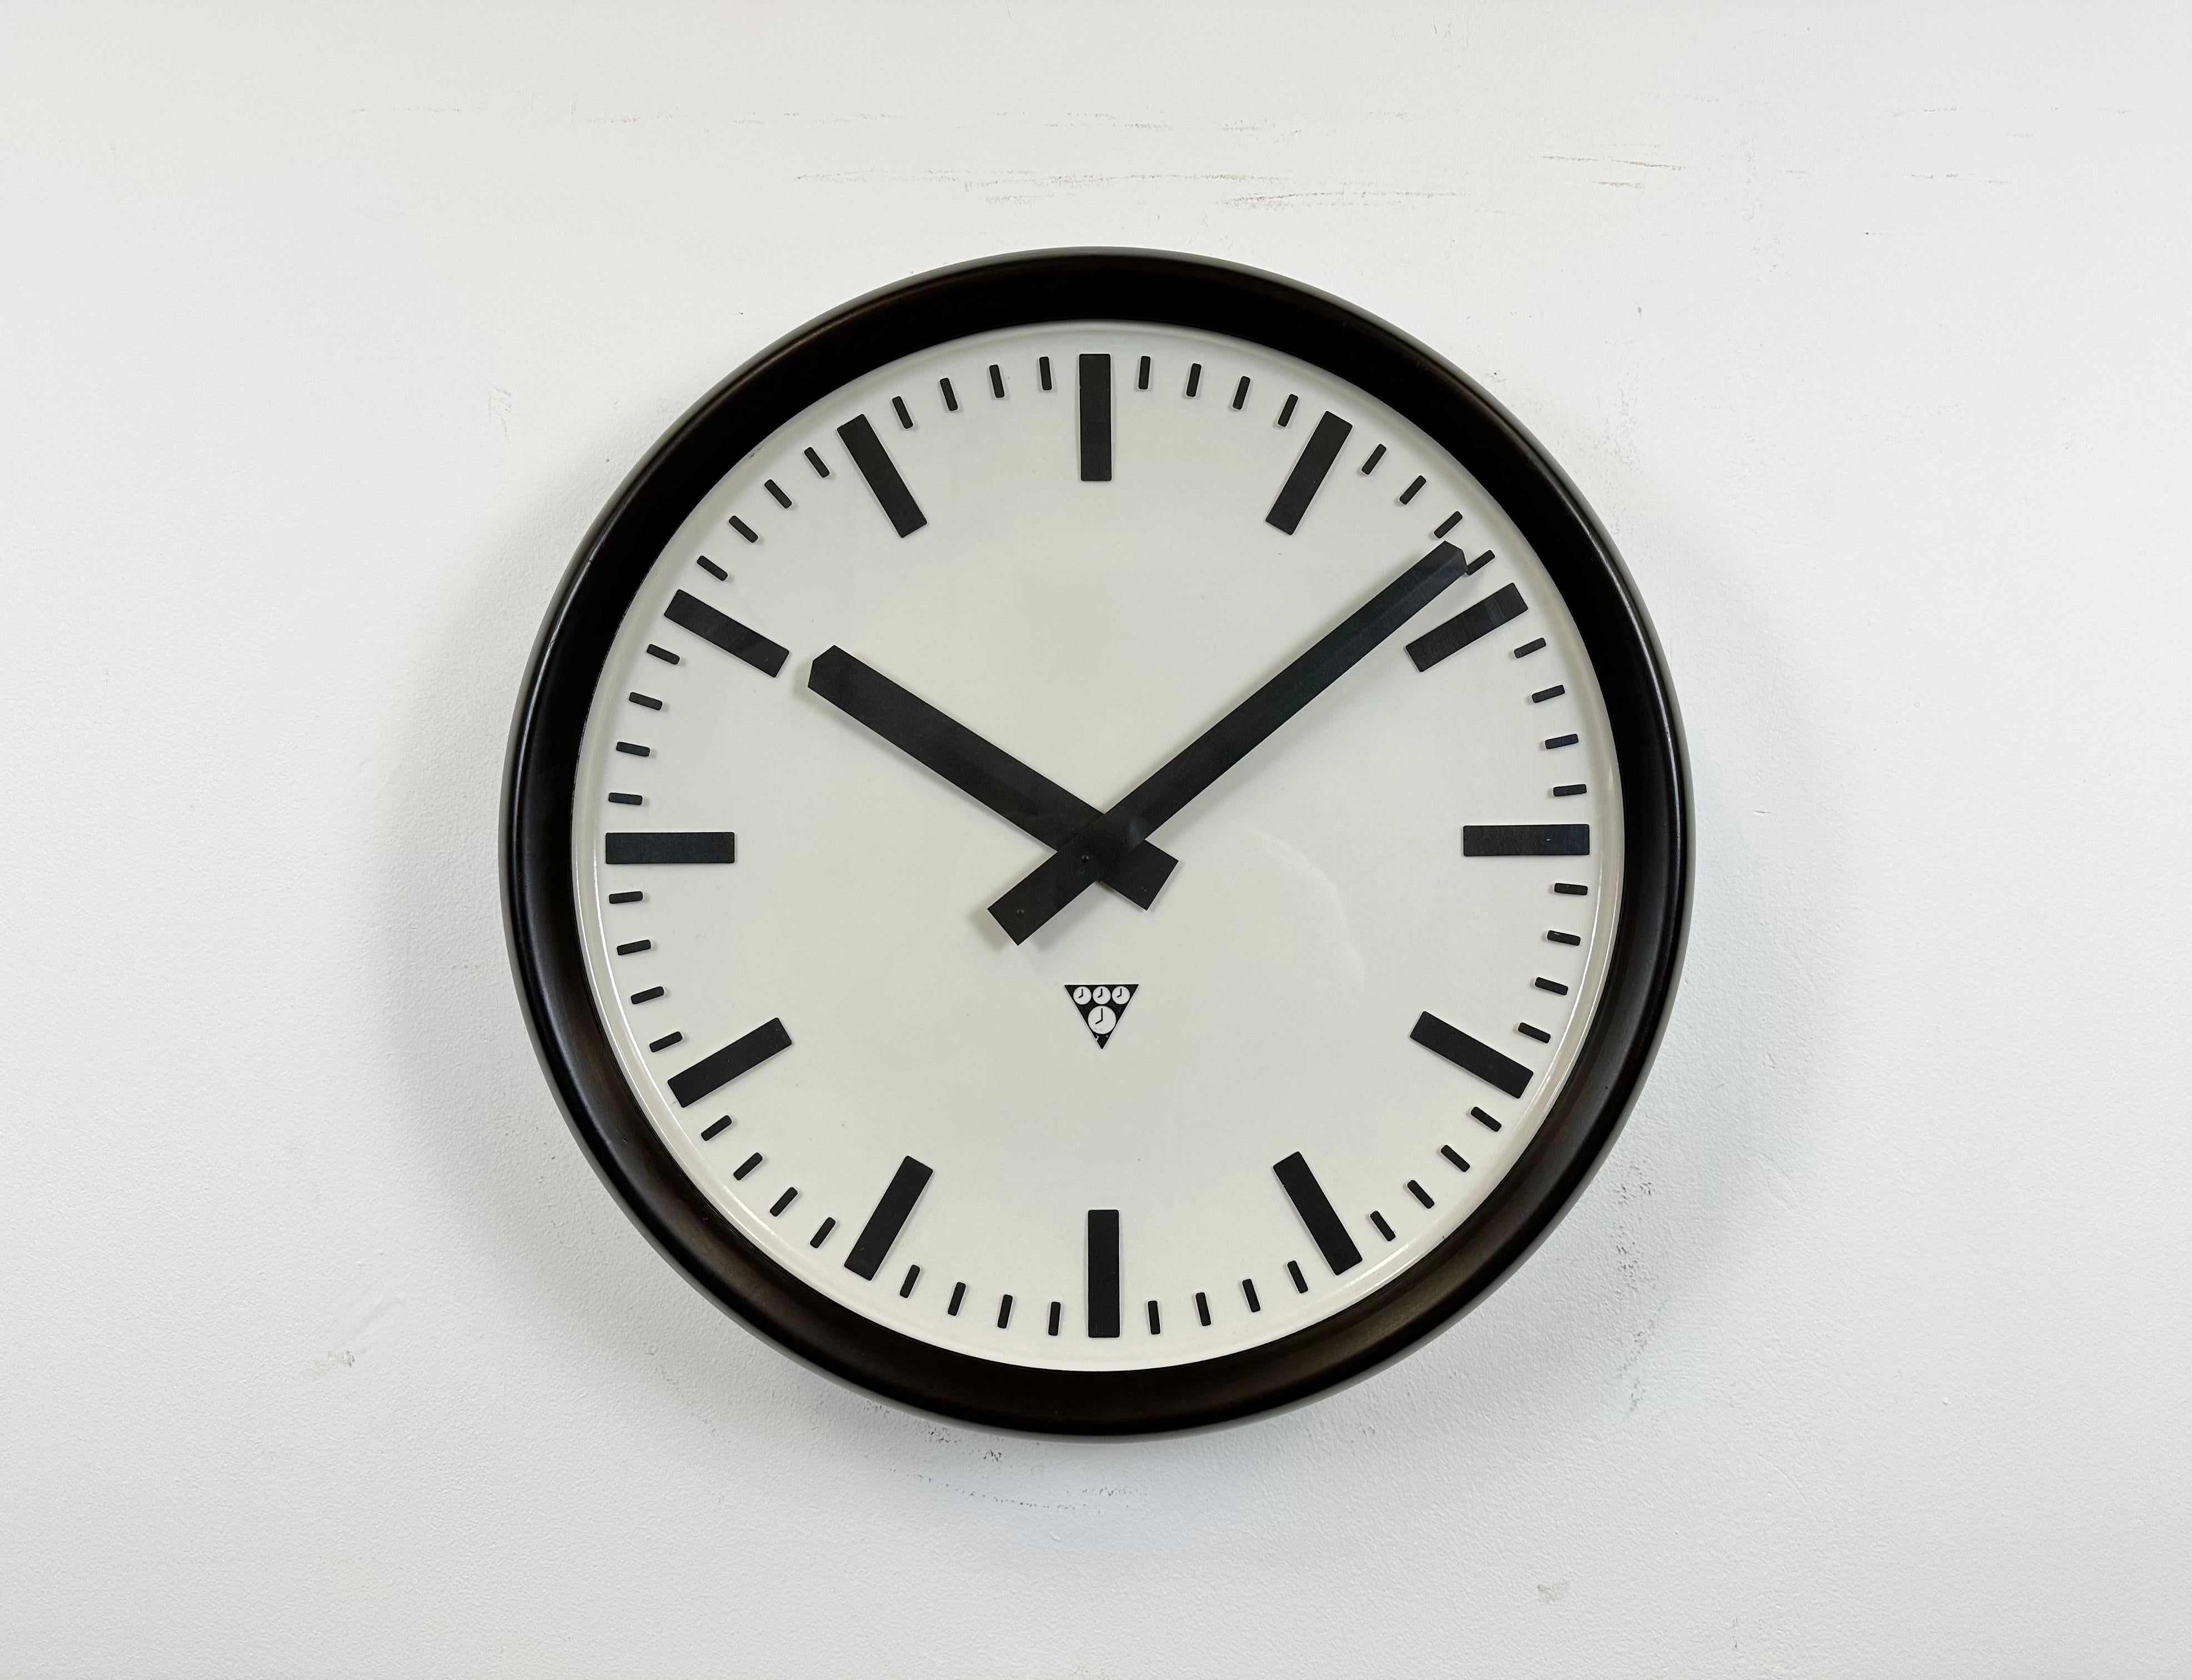 This large wall clock was produced by Pragotron in former Czechoslovakia during the 1960s. It features a brown bakelite frame and back, a plastic dial, an aluminium hands and a clear glass cover. The piece has been converted into a battery-powered